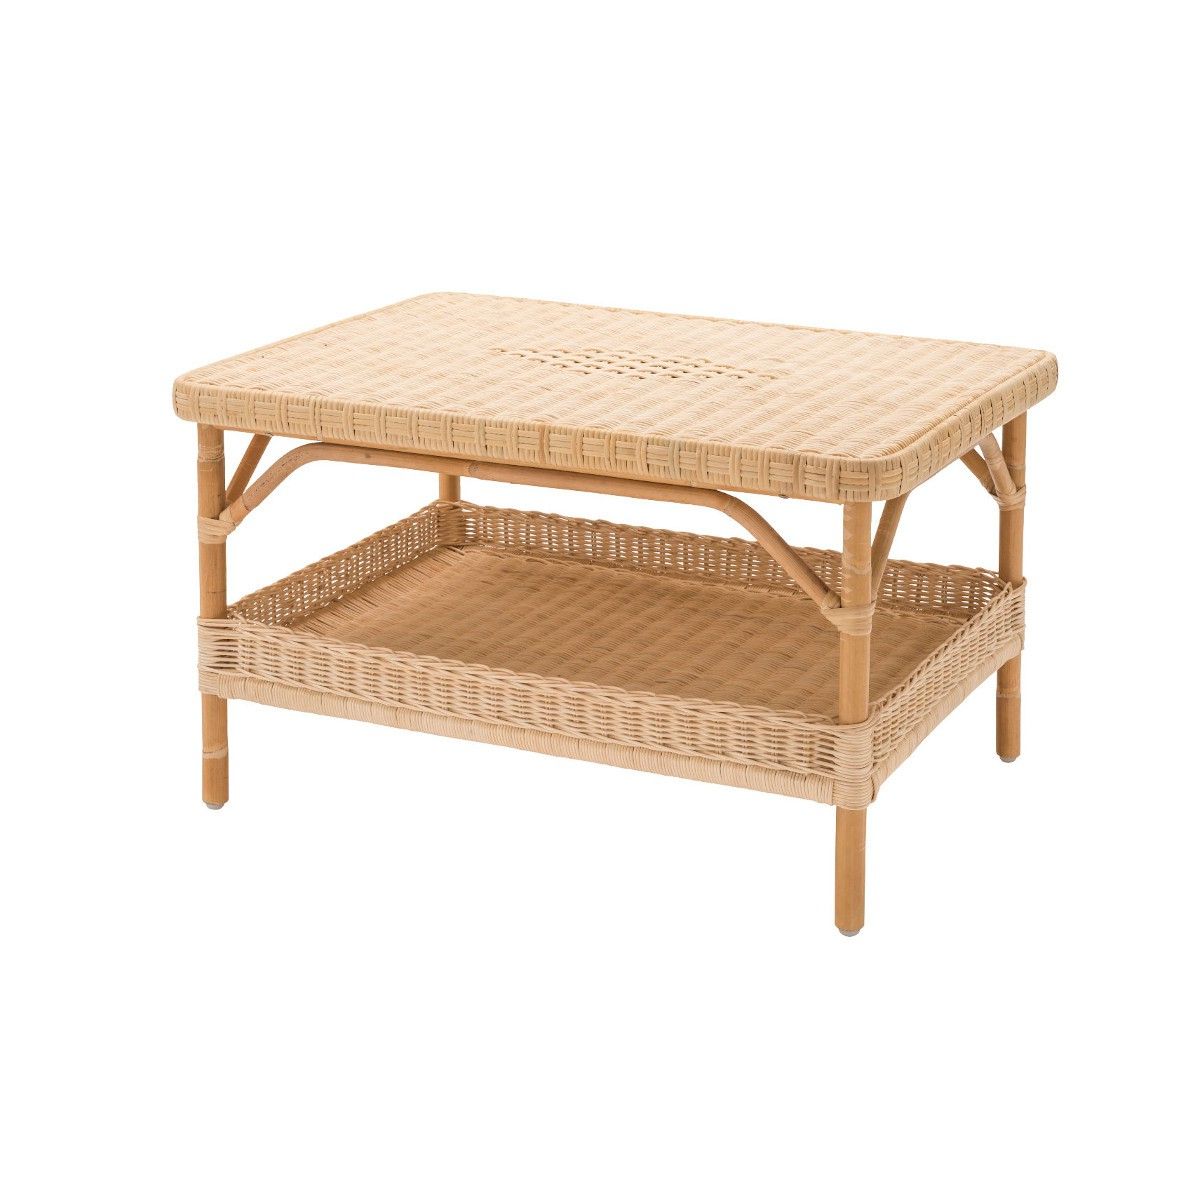 Rattan Coffee Table Rectangular Nantucket Pertaining To Current Rattan Coffee Tables (View 12 of 20)